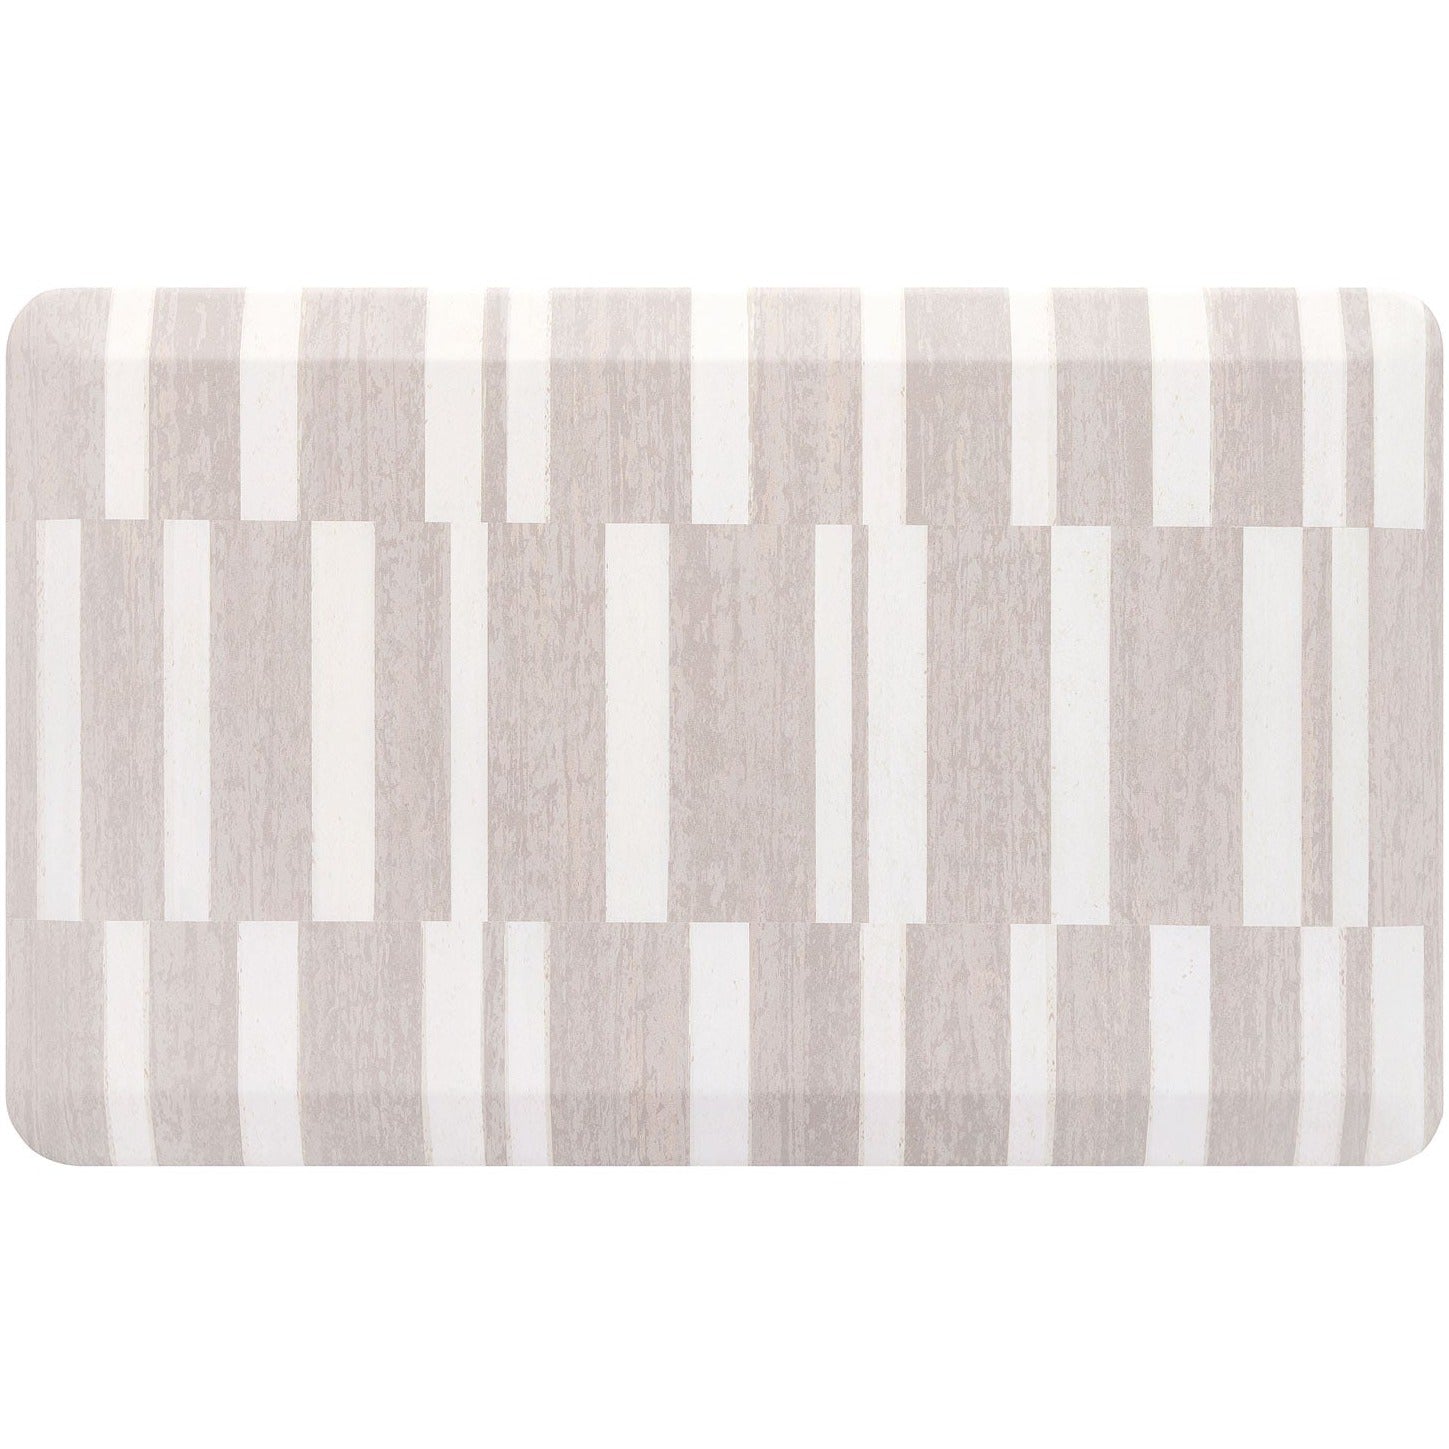 Overhead image of sutton stripe palomino beige and white inverted stripe standing mat shown in size 22x36